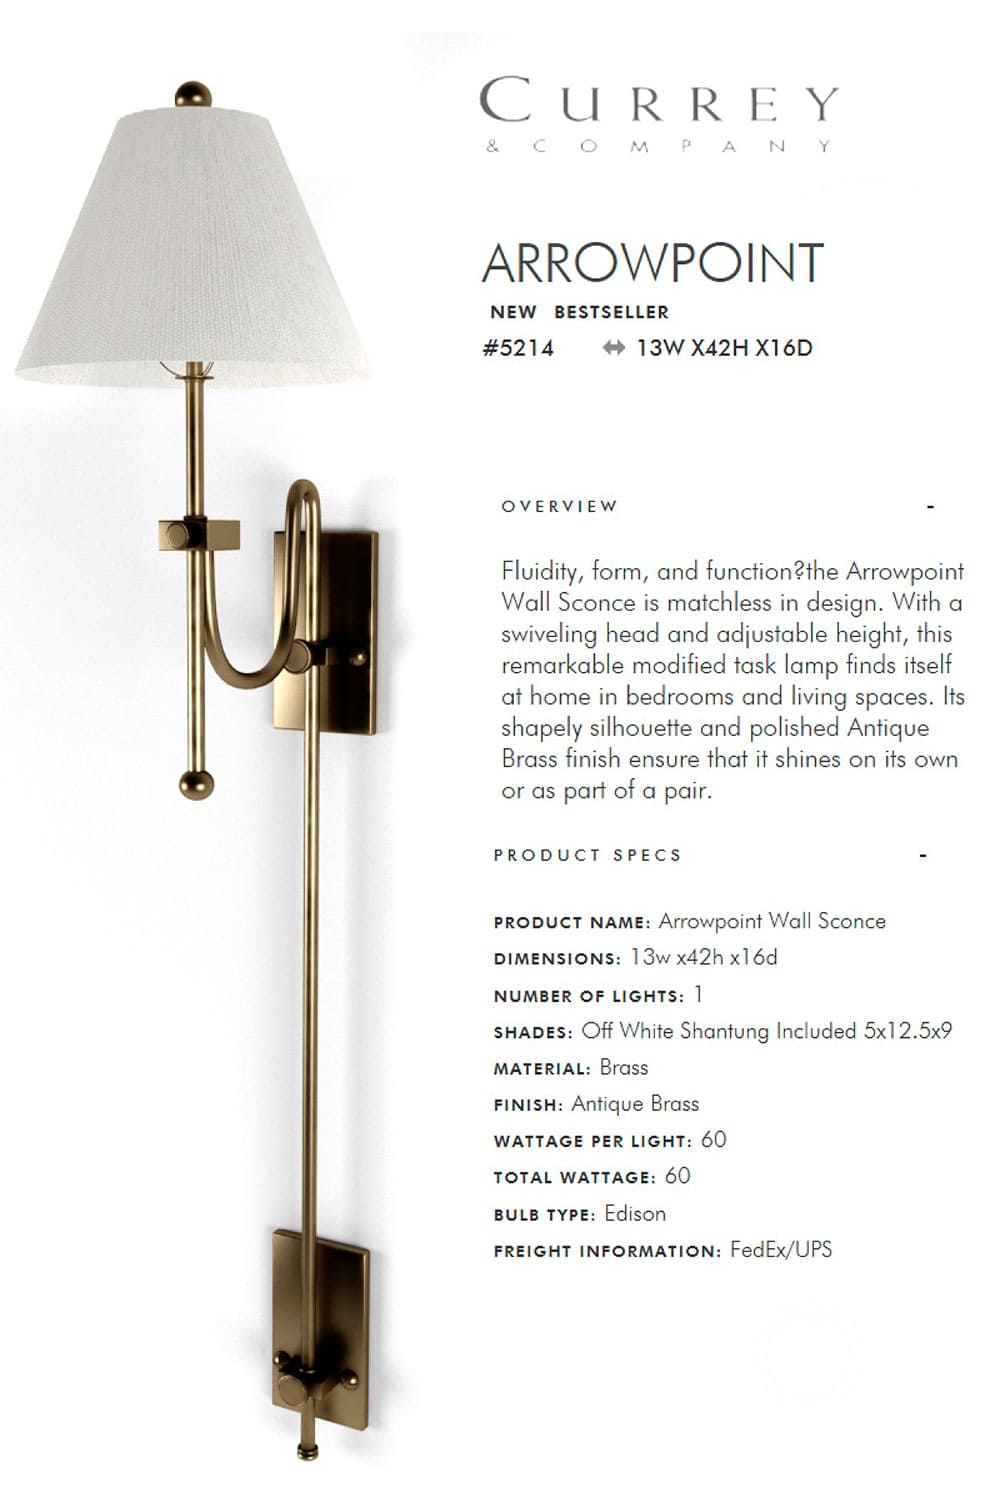 Arrowpoint wall sconce, picture for pinterest.